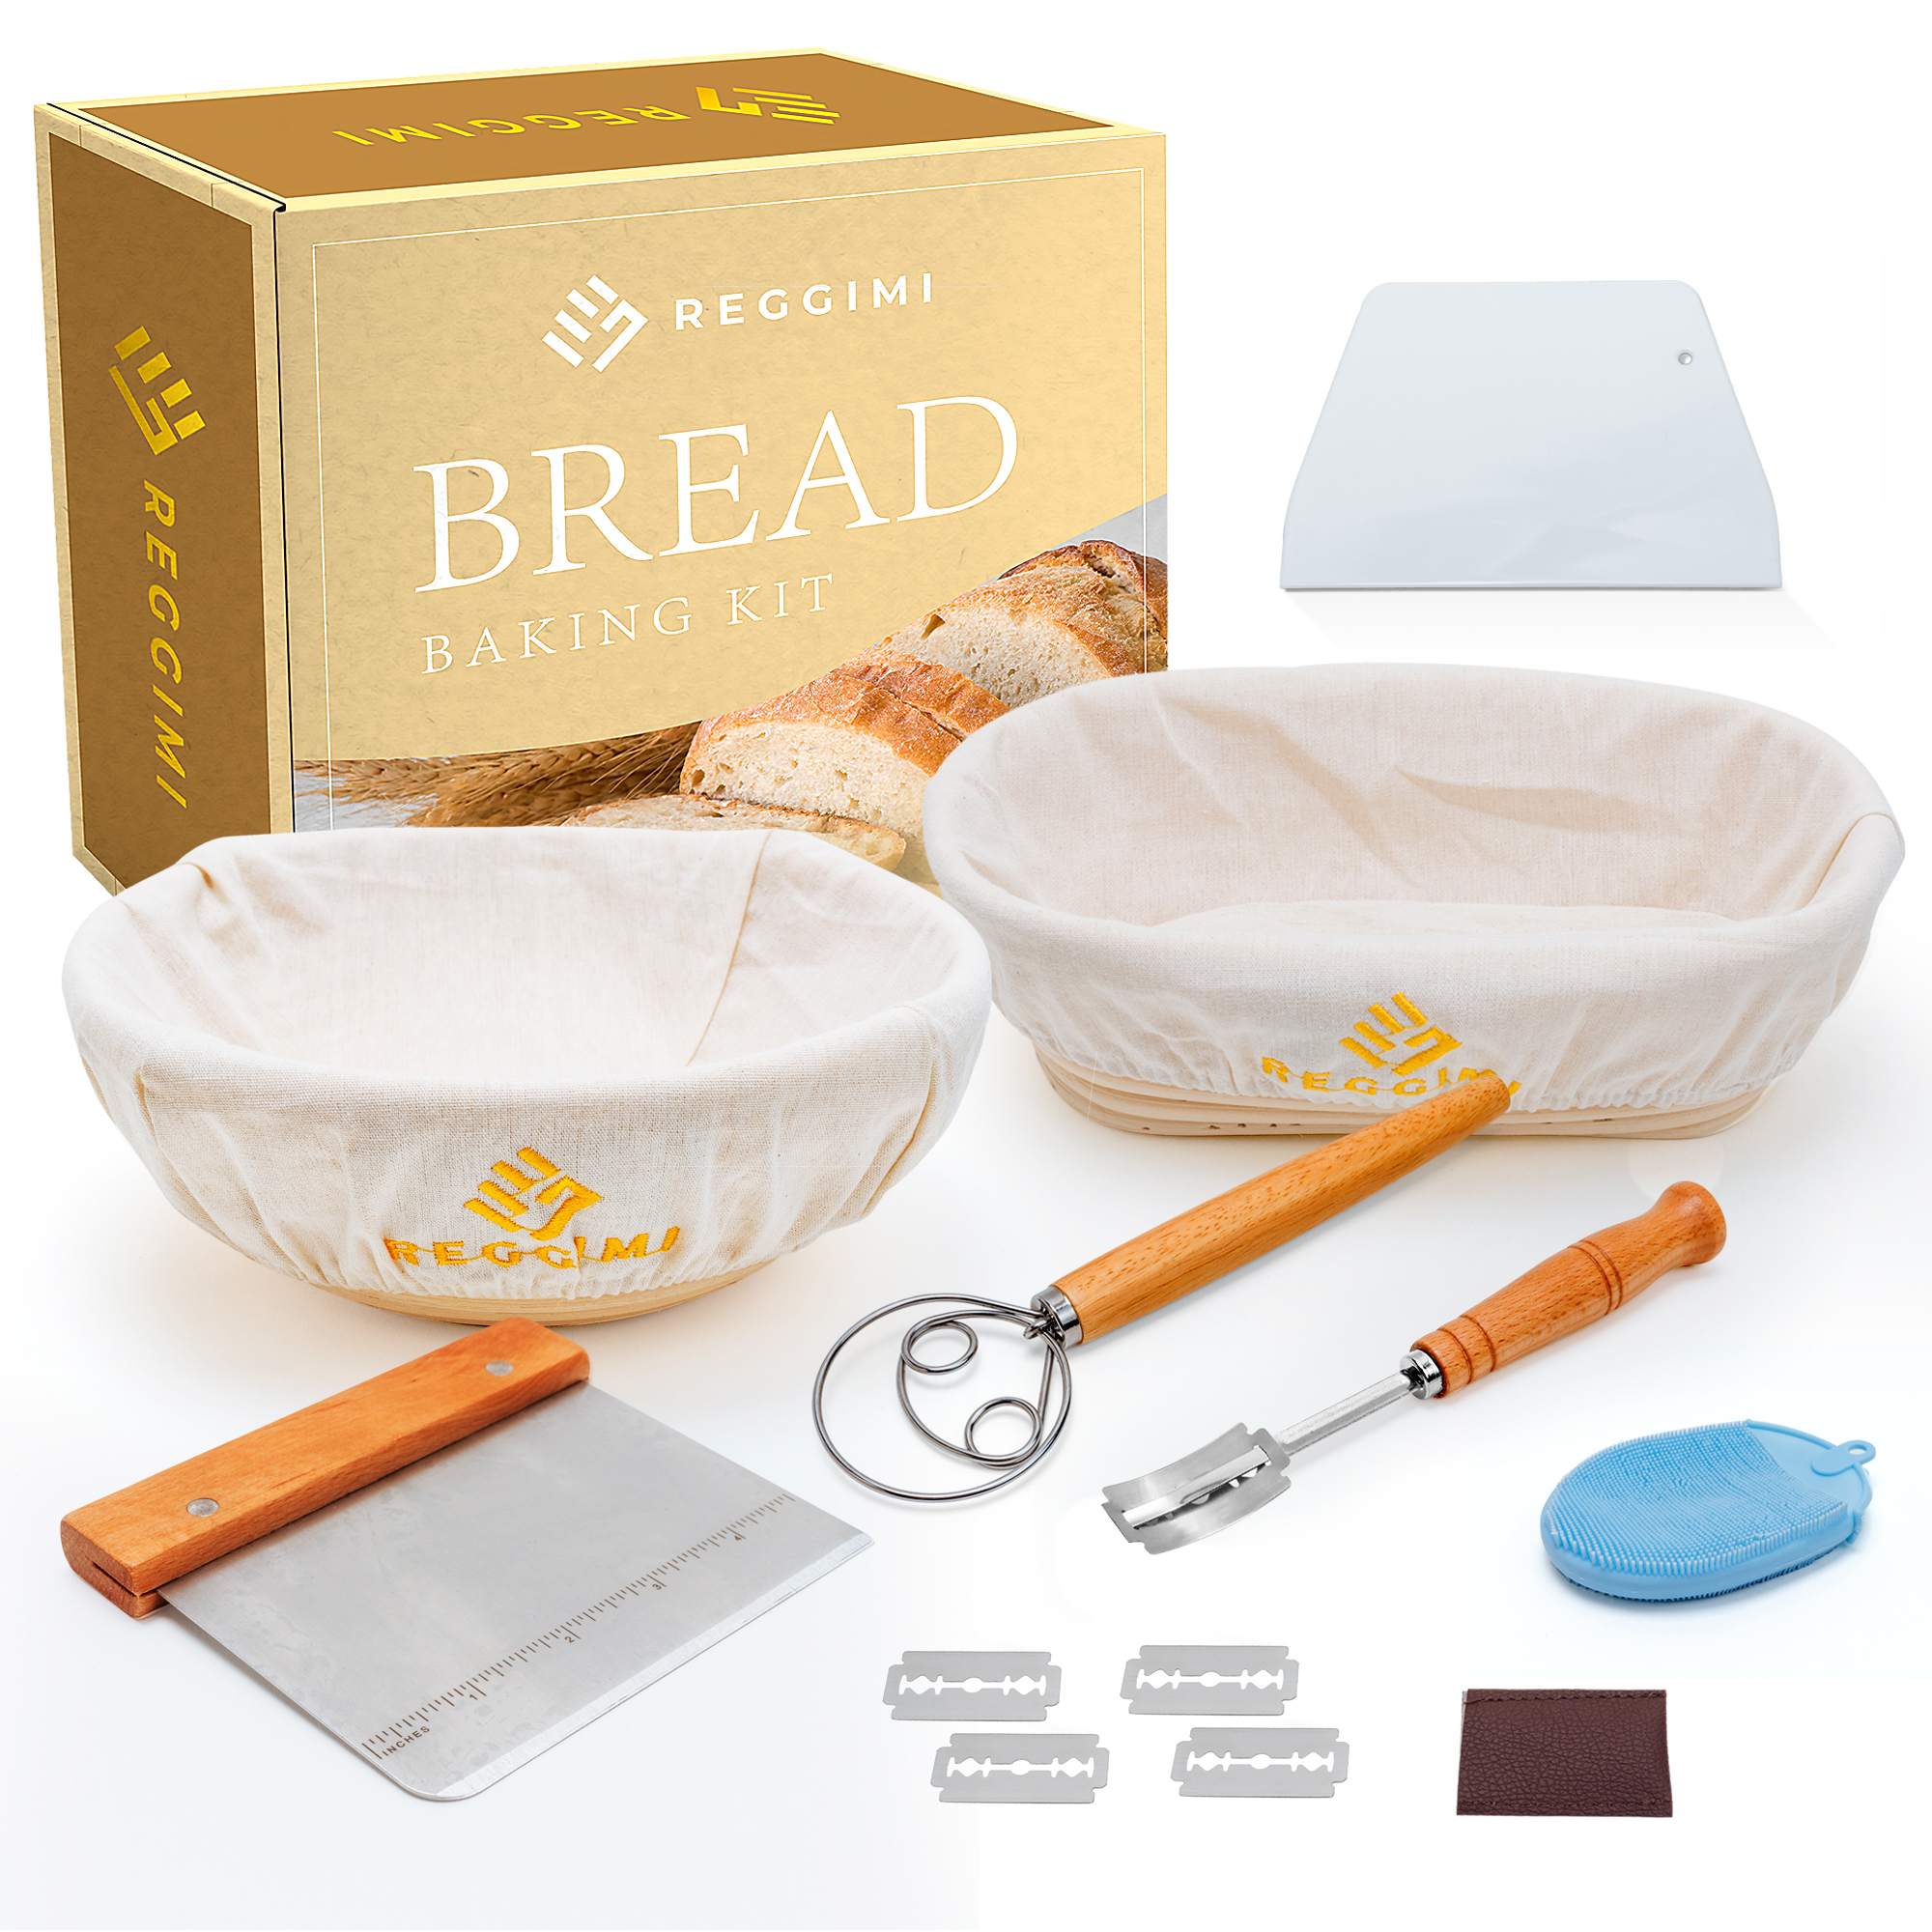 Sourdough Bread Proofing Baskets and Baking Supplies, a Complete